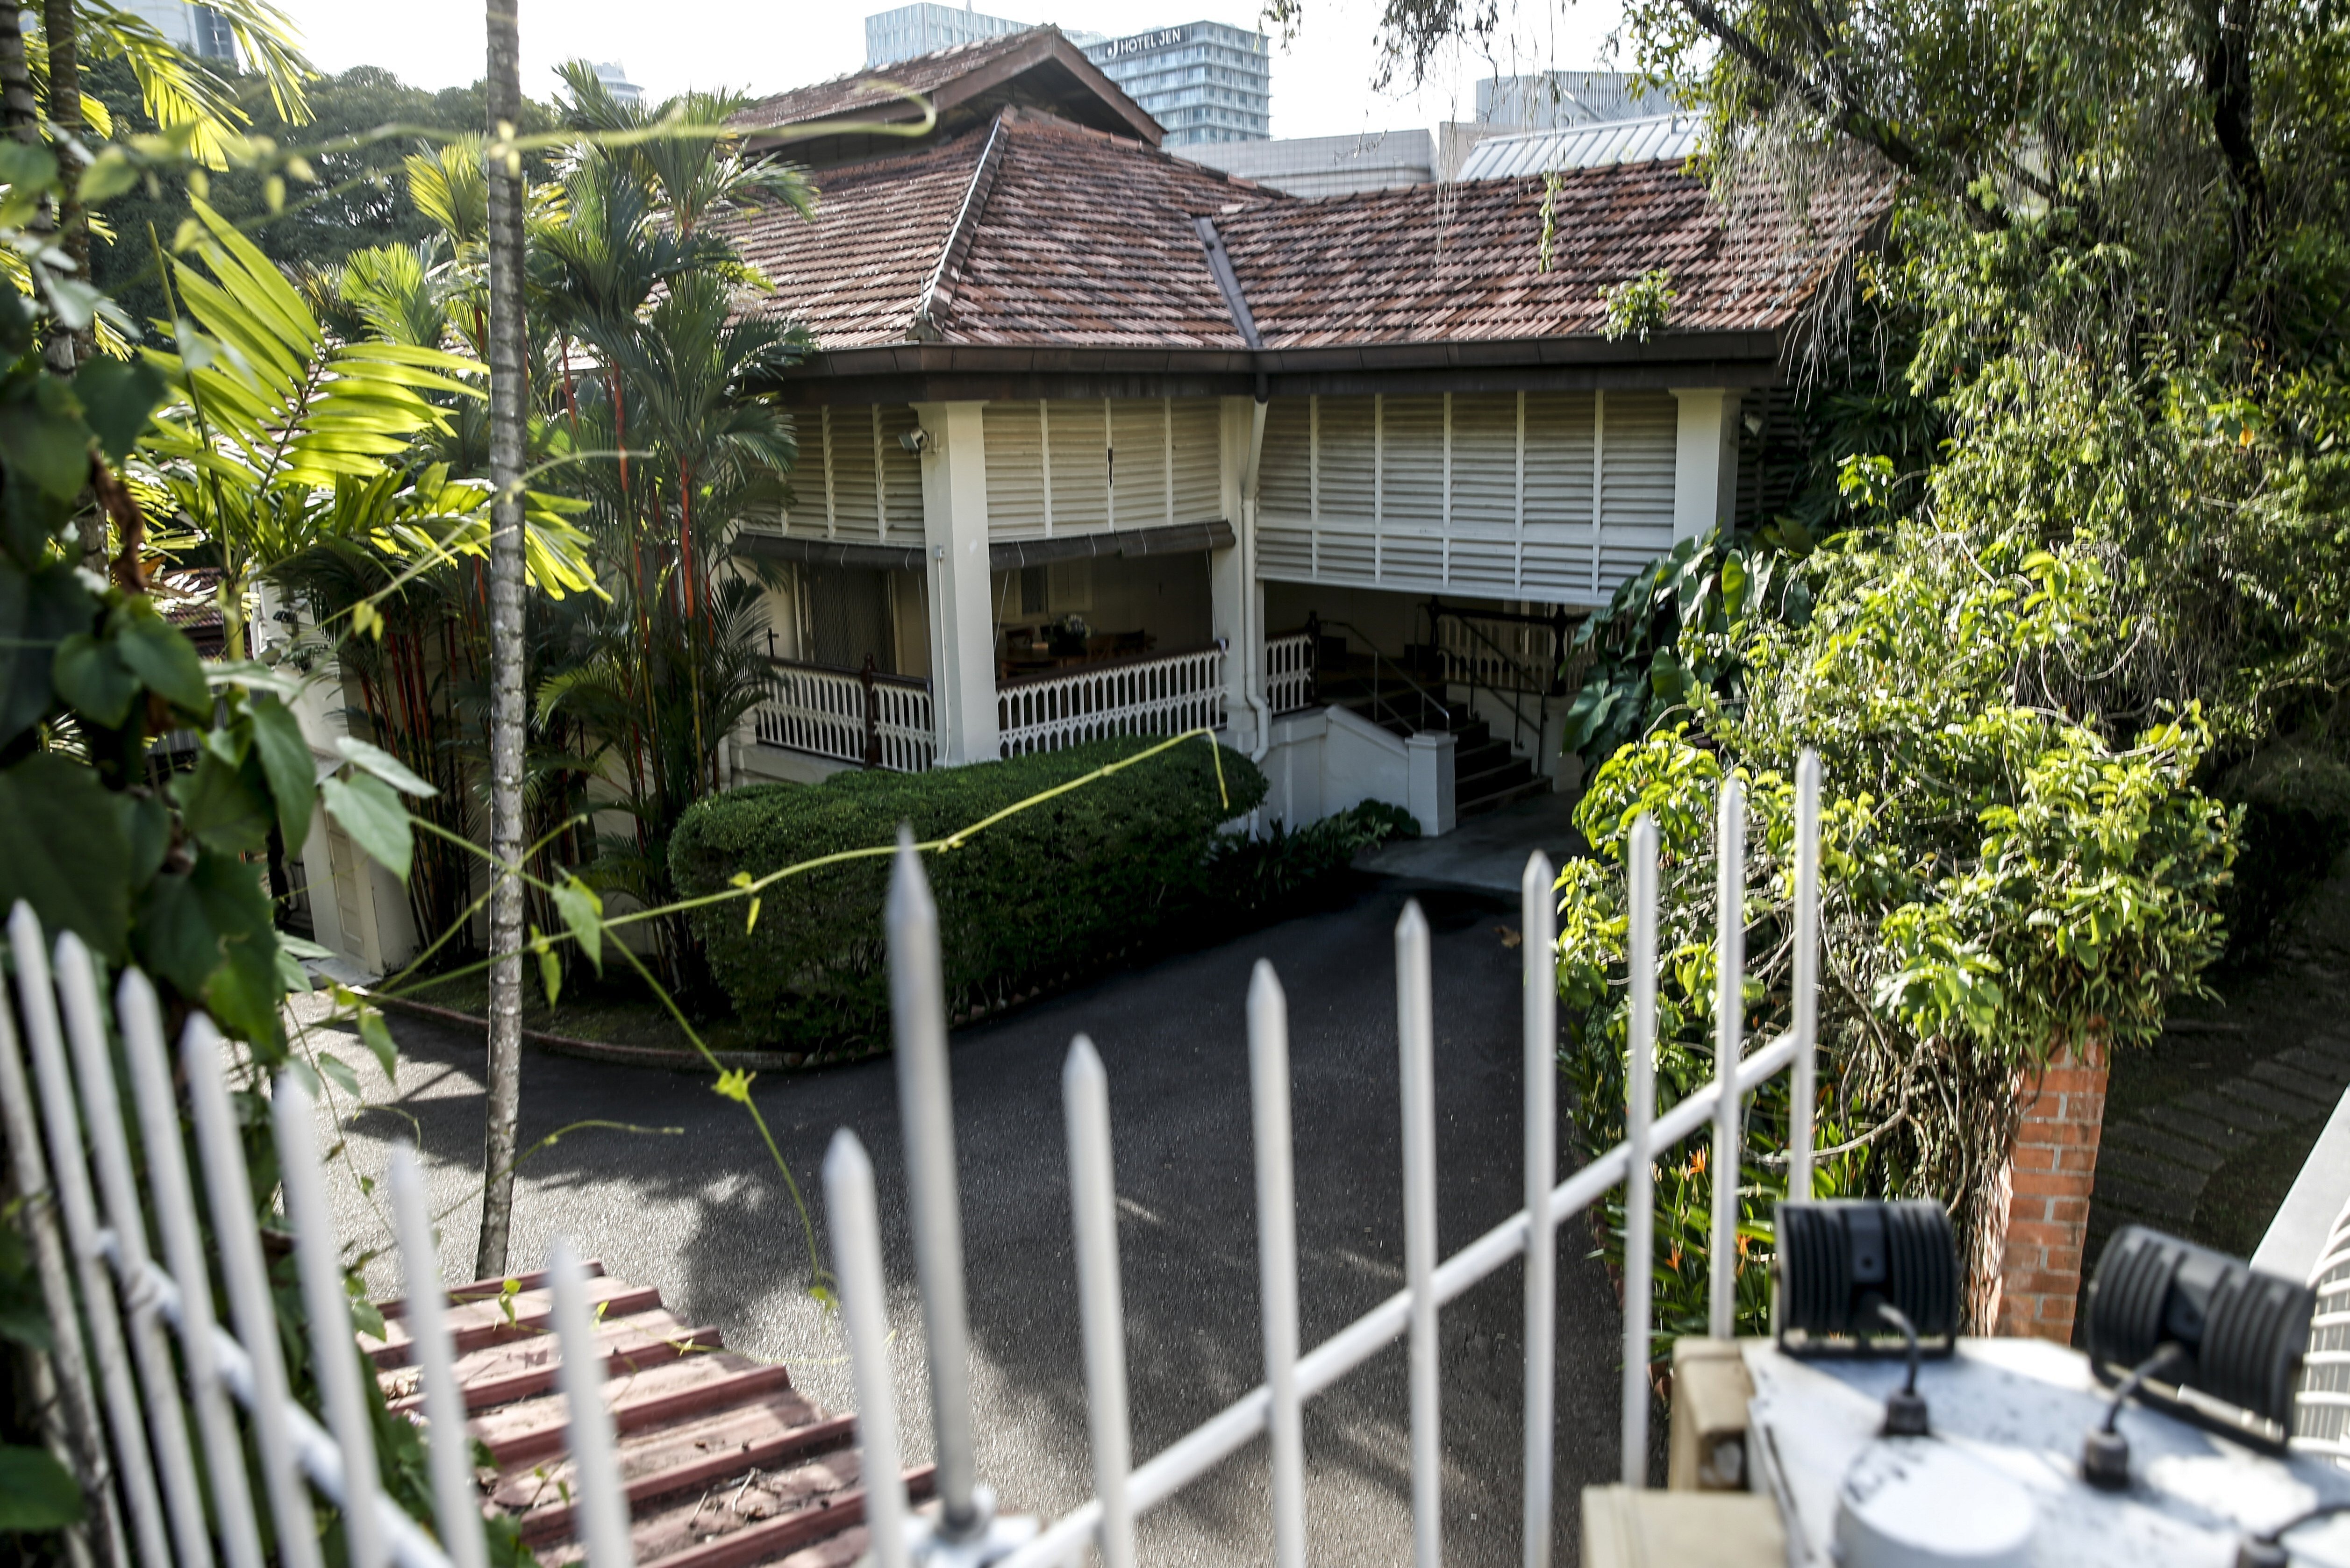 The former residence of Singapore's first prime minister Lee Kuan Yew, at 38 Oxley Road. His three children have been at odds on what to do with the house following his death in 2015. Photo: EPA